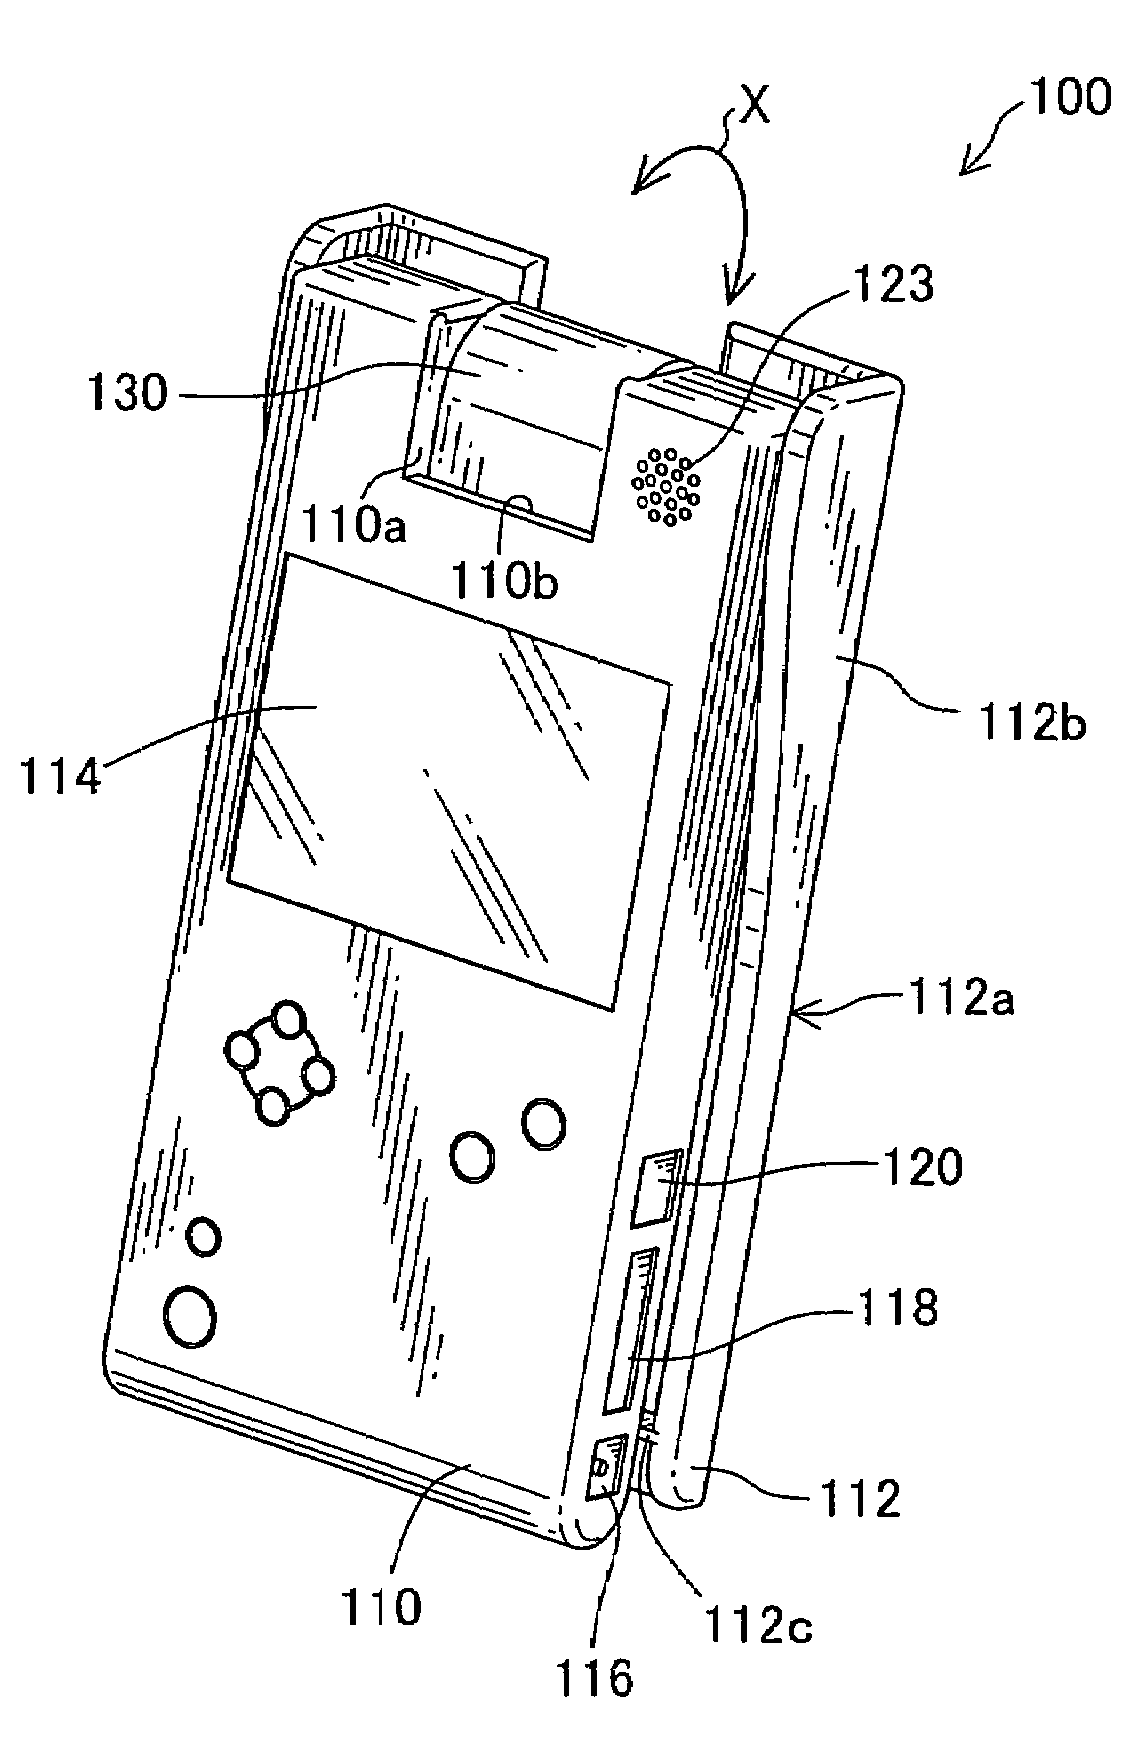 Imaging apparatus for outputting on an external display device an image captured by the apparatus